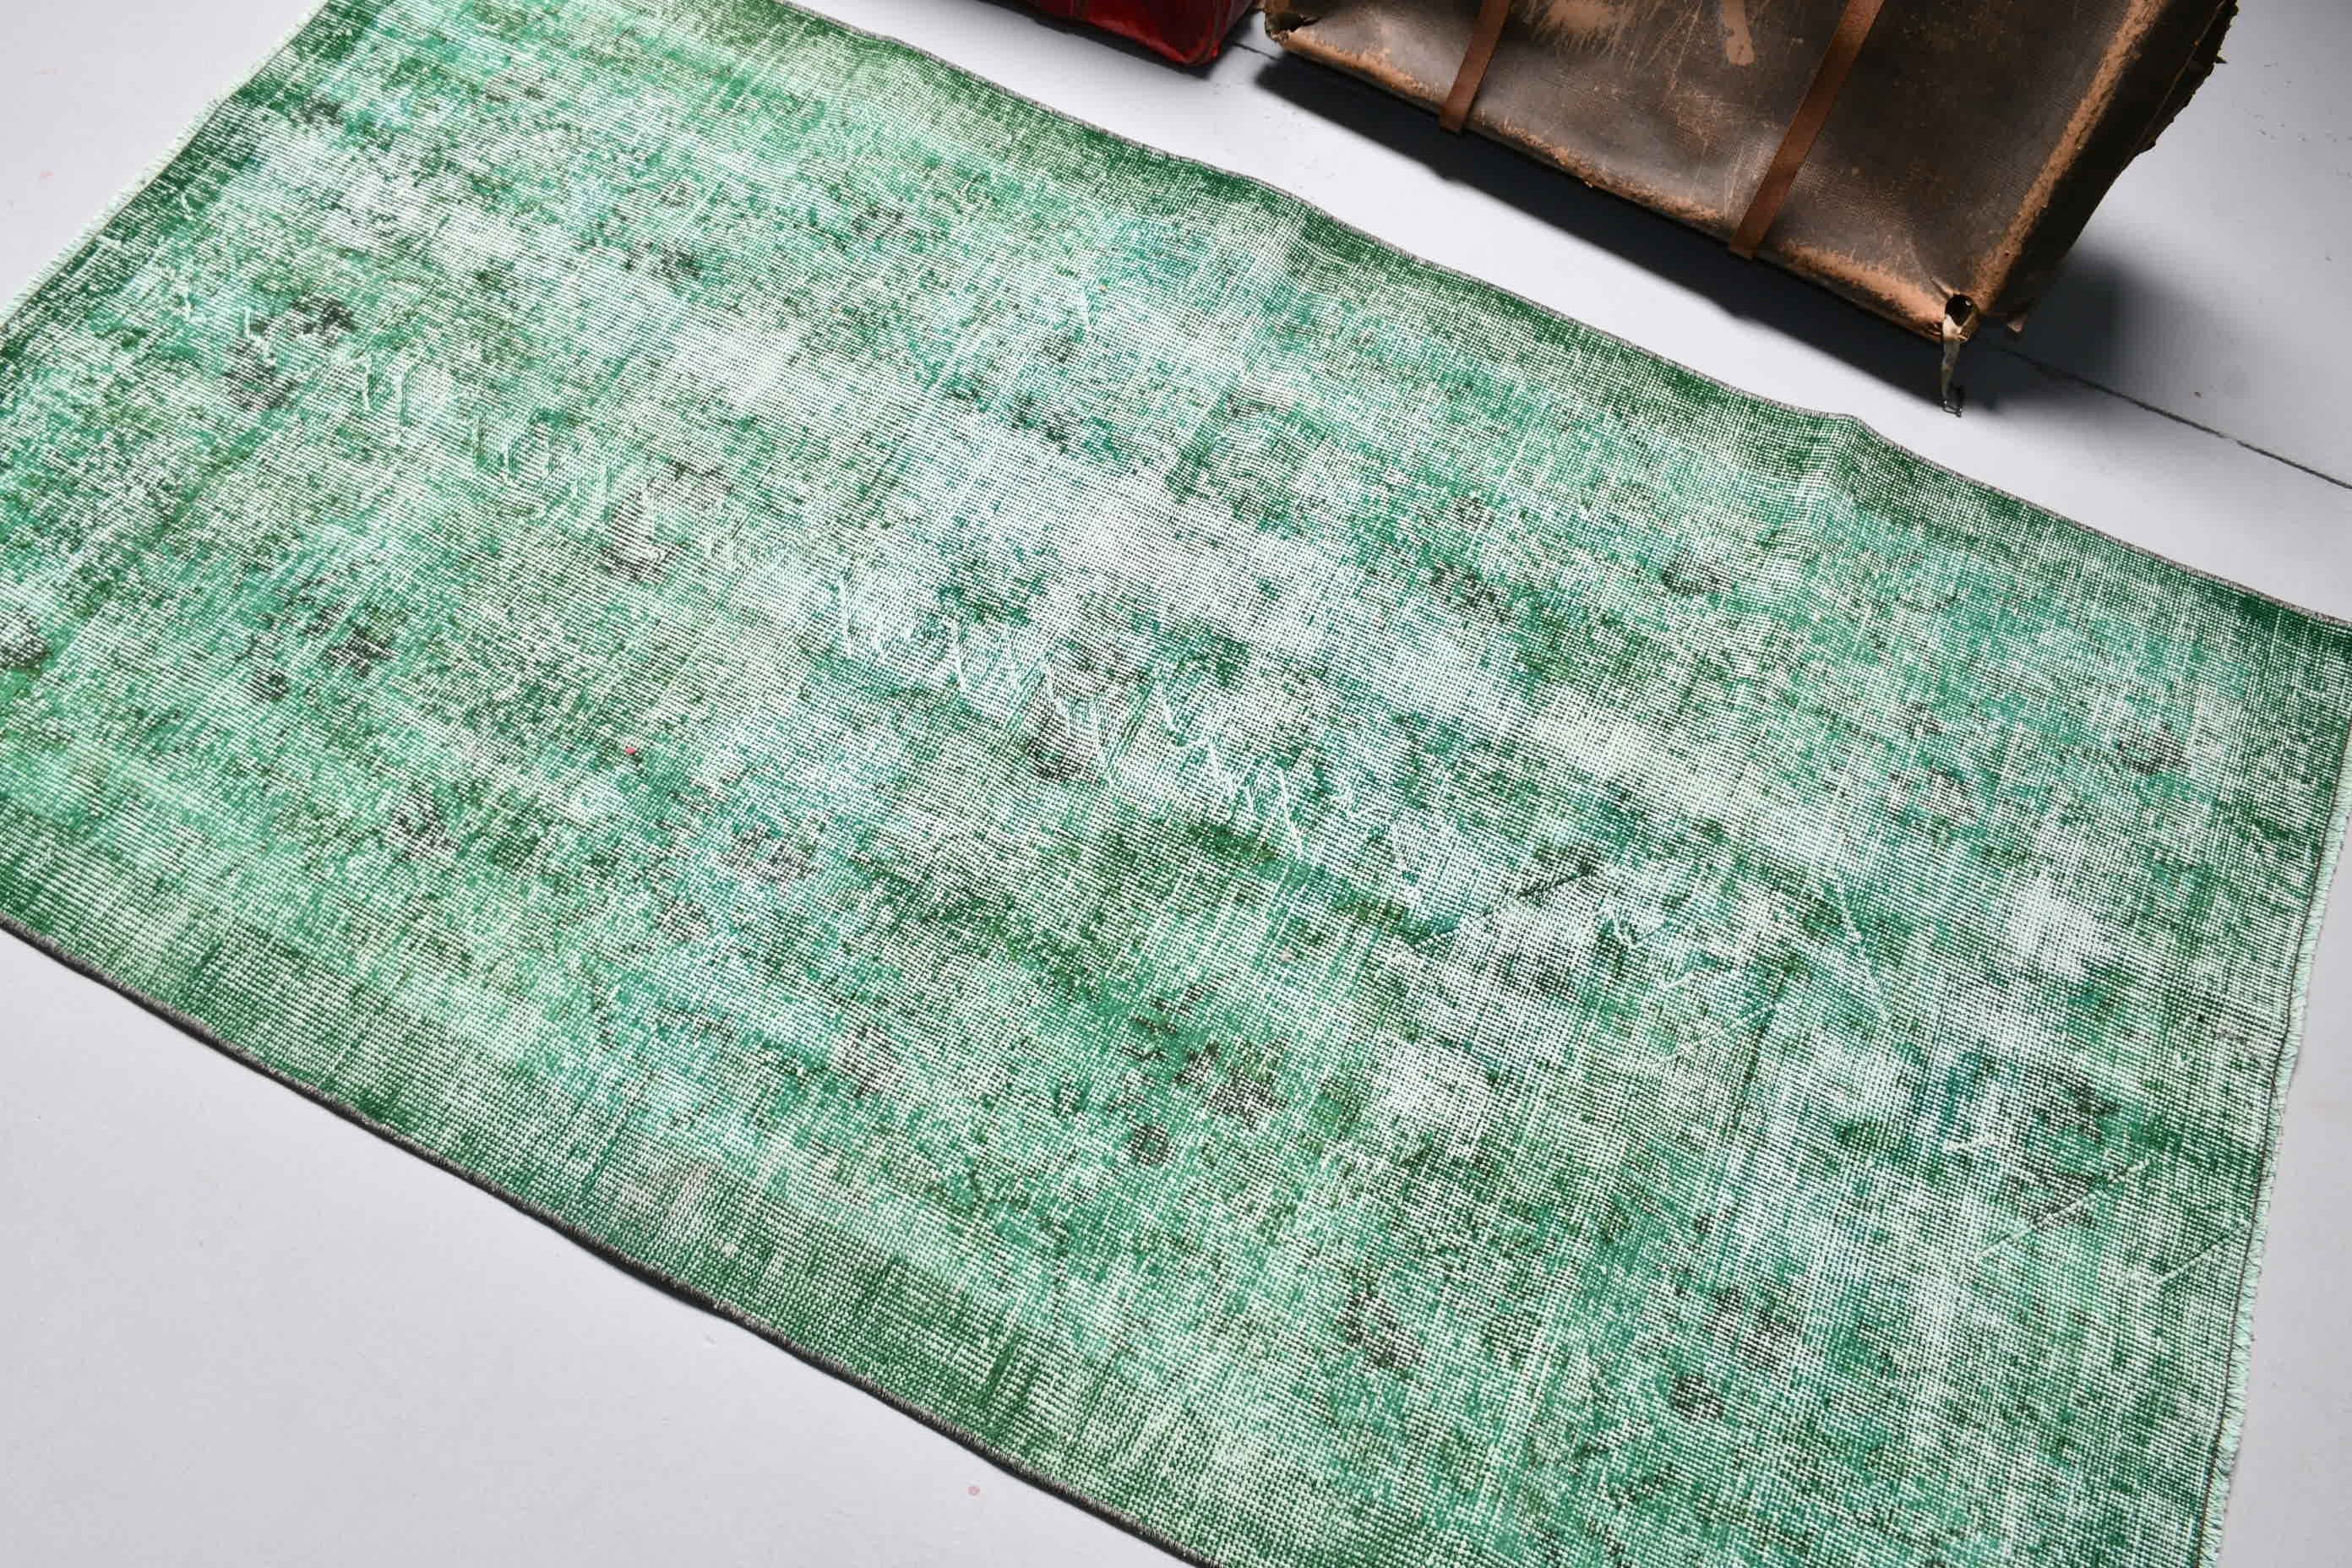 Cool Rug, 3.5x6.3 ft Accent Rugs, Rugs for Entry, Office Rug, Nursery Rug, Kitchen Rug, Turkish Rug, Vintage Rug, Green Moroccan Rugs